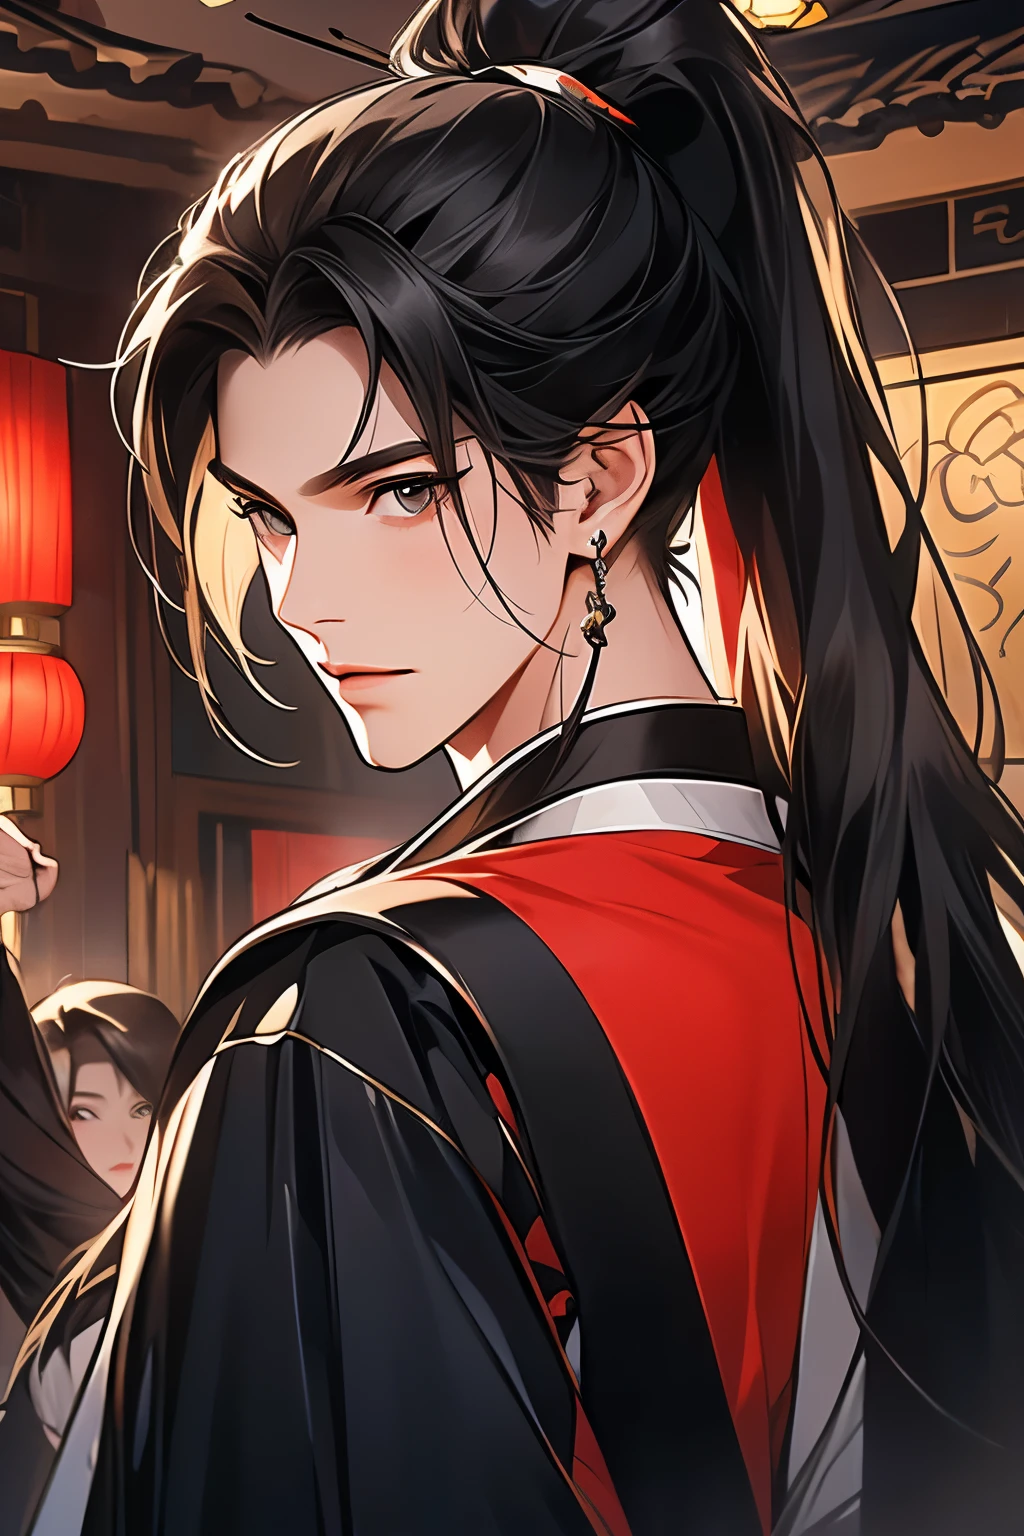 Black Hanfu man，high ponytails，the only person，The wind blows through Hanfu，asian architecture interior，a sense of atmosphere，Dutch Angle Shot,gentlesoftlighting,Upper part of the body，Black Hanfu，longer sleeves，ssmile，dining room，Chinese furniture，Black Hanfu，Black Hanfu，